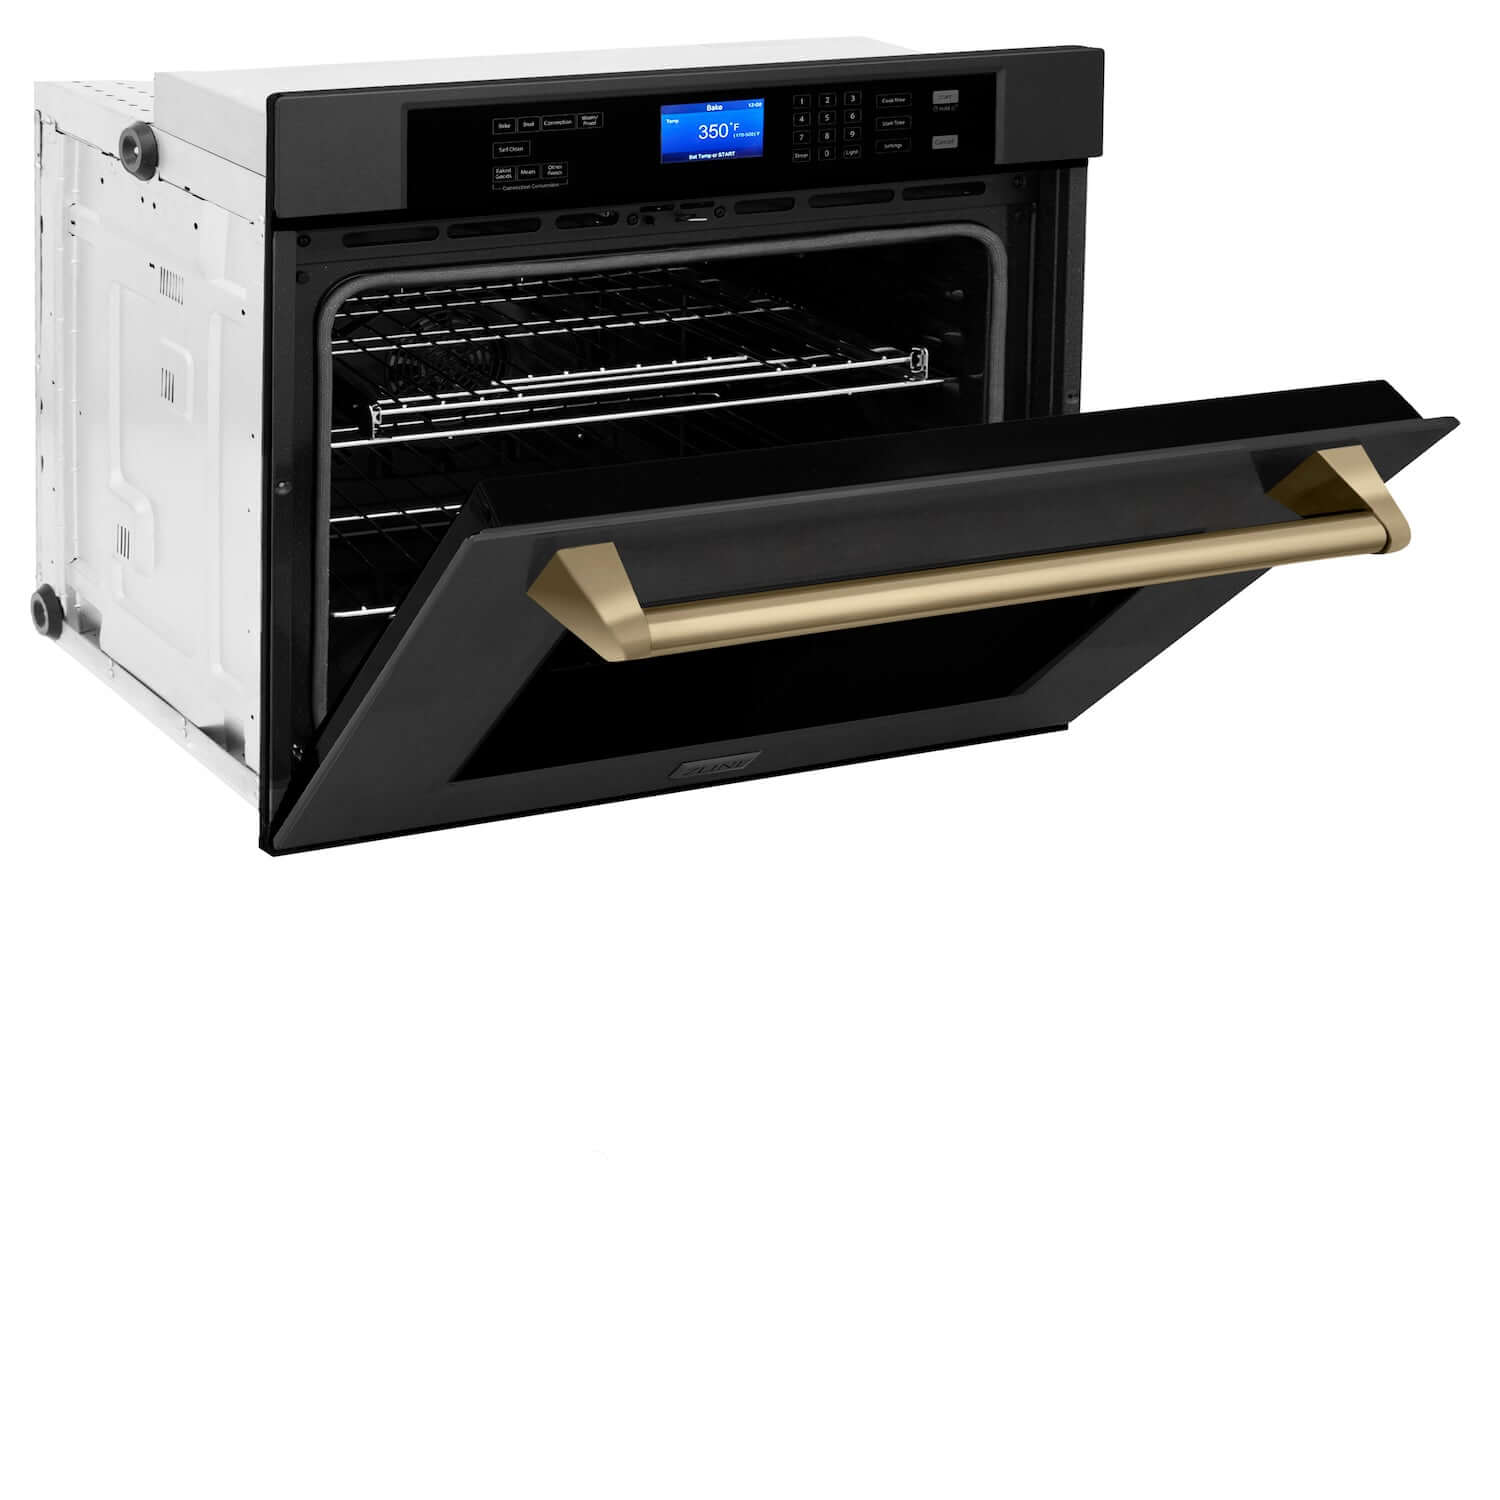 ZLINE Autograph Edition 30 in. Single Wall Oven with Self Clean and True Convection in Black Stainless Steel and Champagne Bronze Accents (AWSZ-30-BS-CB) side, half open.